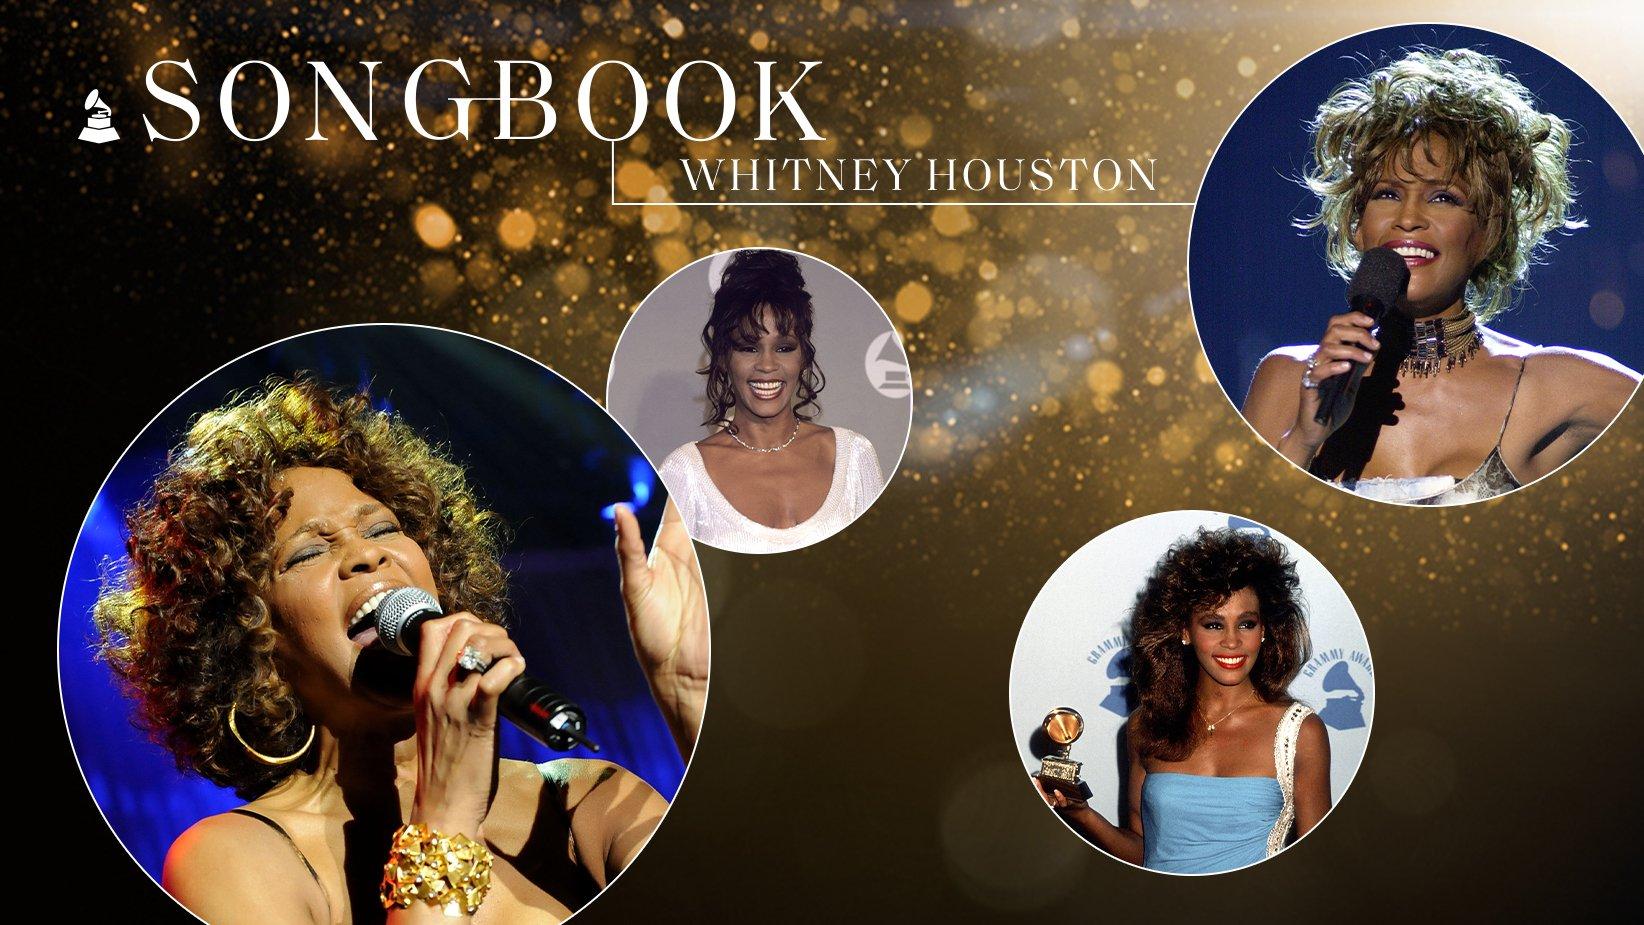 Songbook A Guide To Whitney Houstons Iconic Discography, From Her 80s Pop Reign To Soundtrack Smashes GRAMMY pic